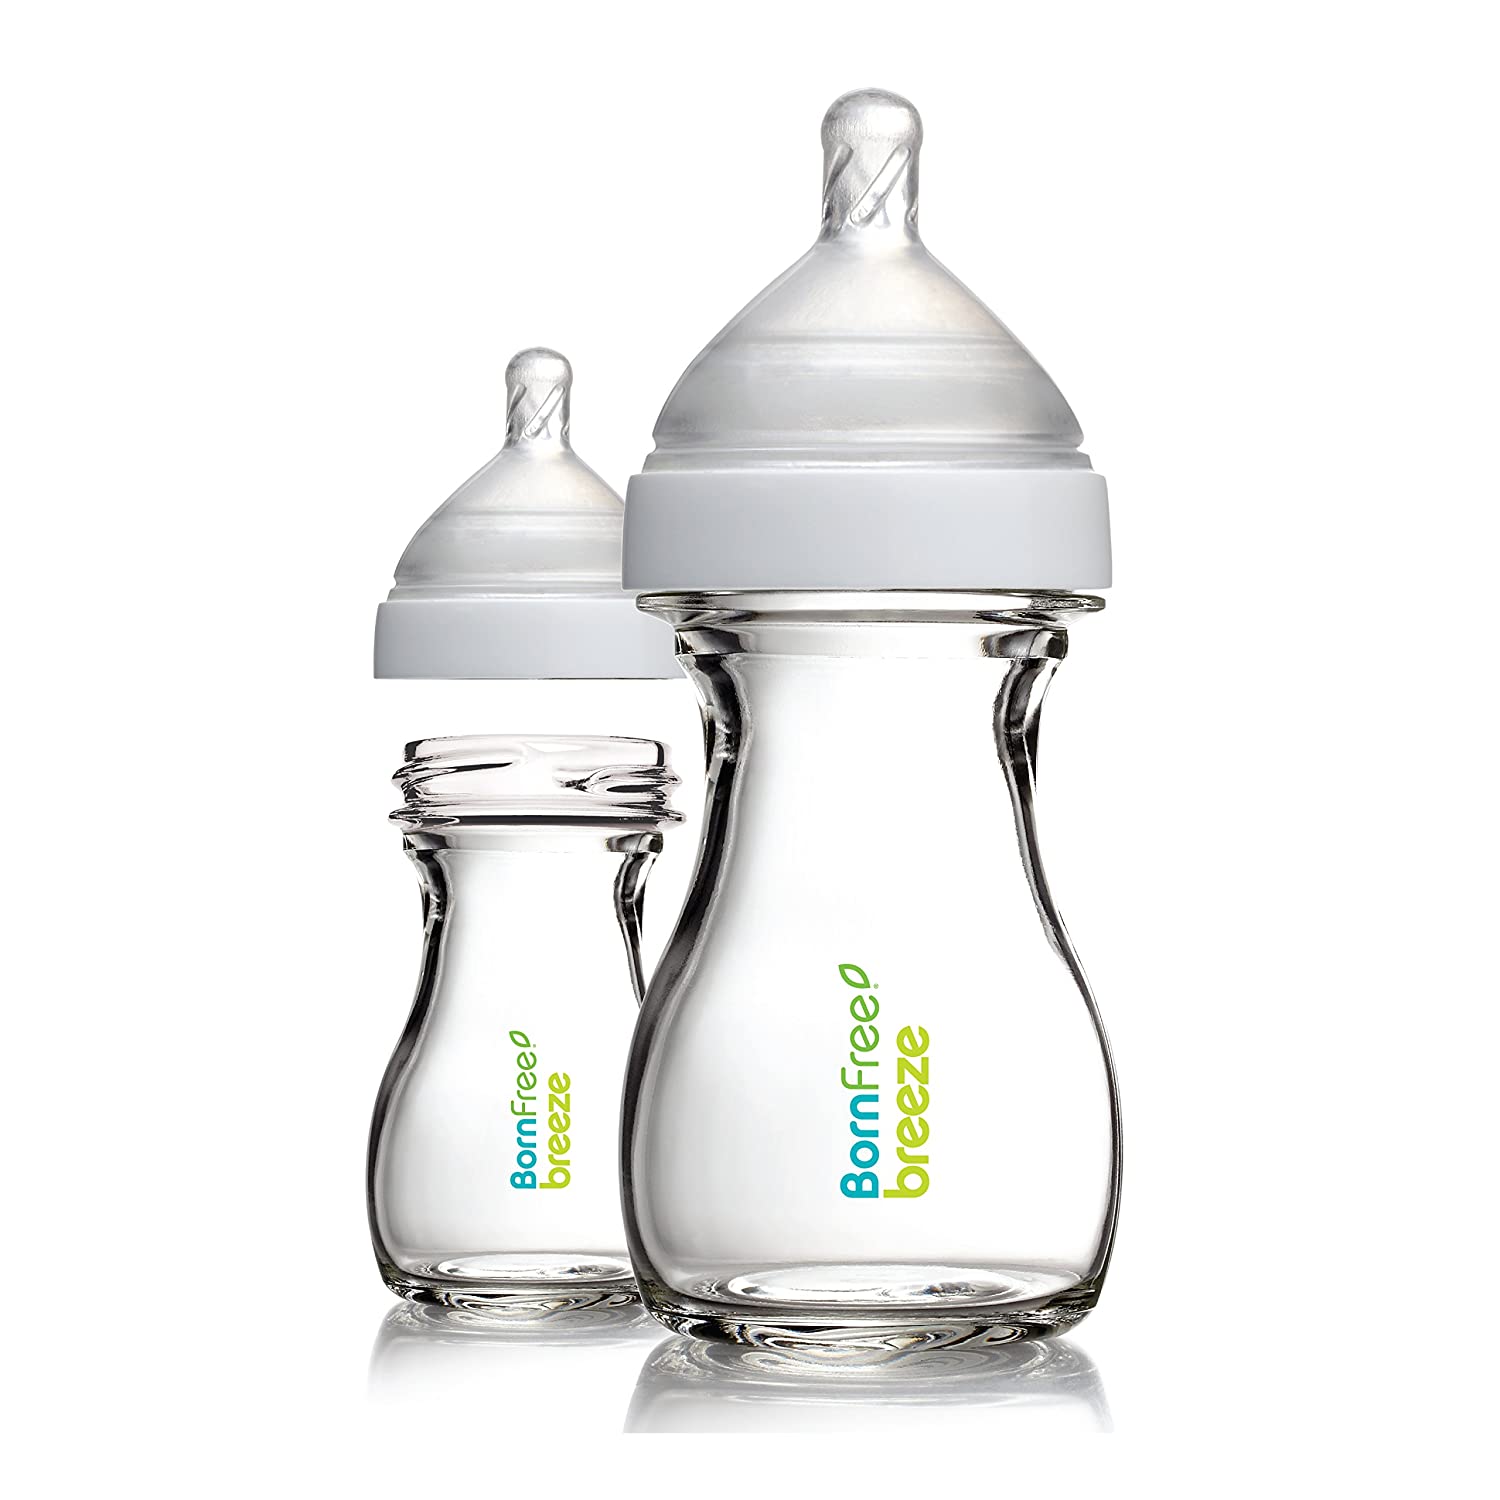 Top 6 Best Glass Baby Bottles Reviews in 2022 4